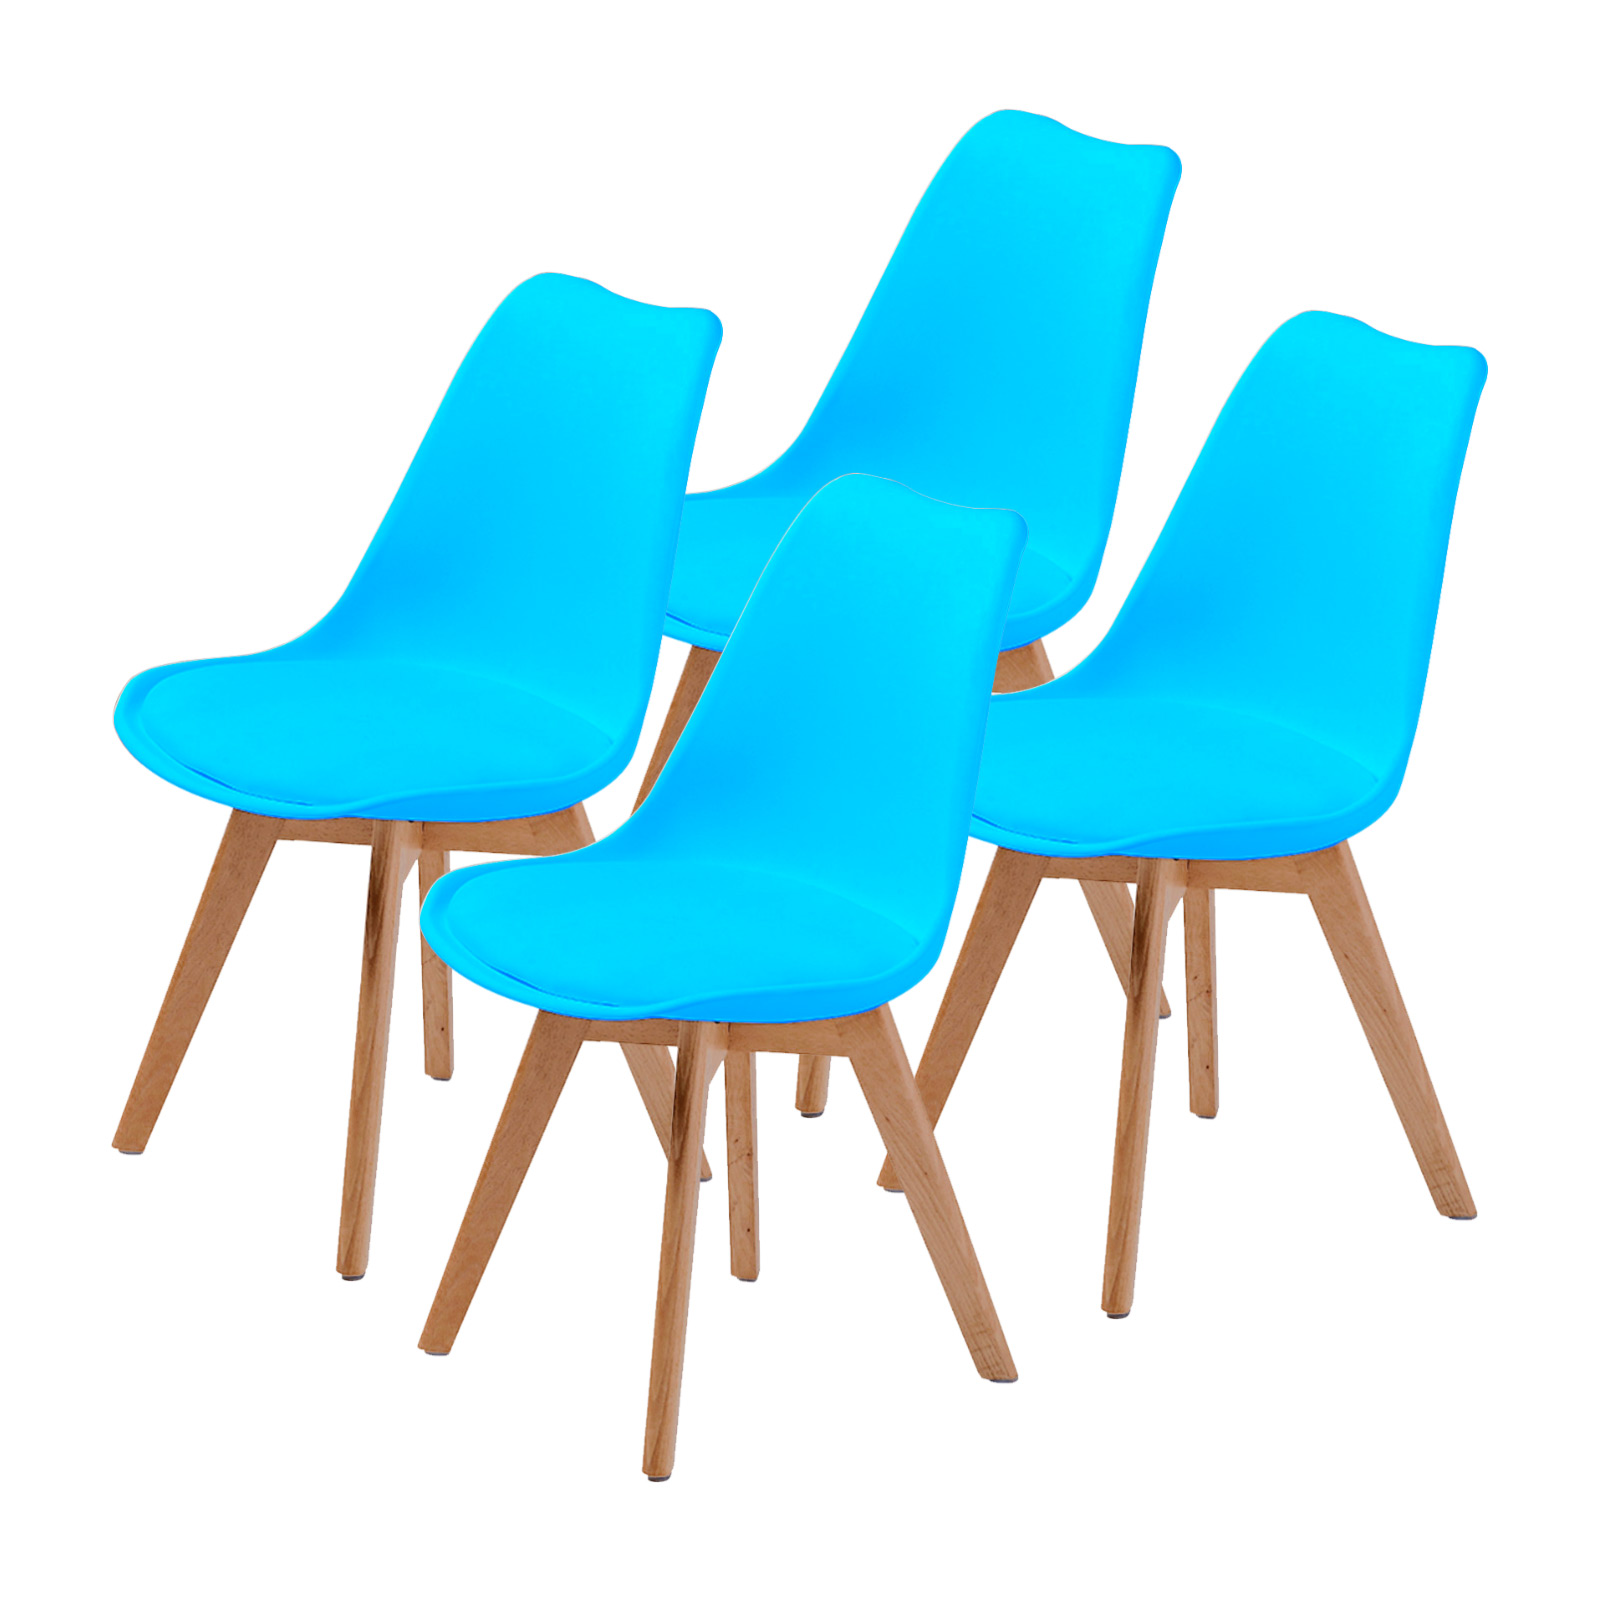 4X Padded Seat Dining Chair - BLUE